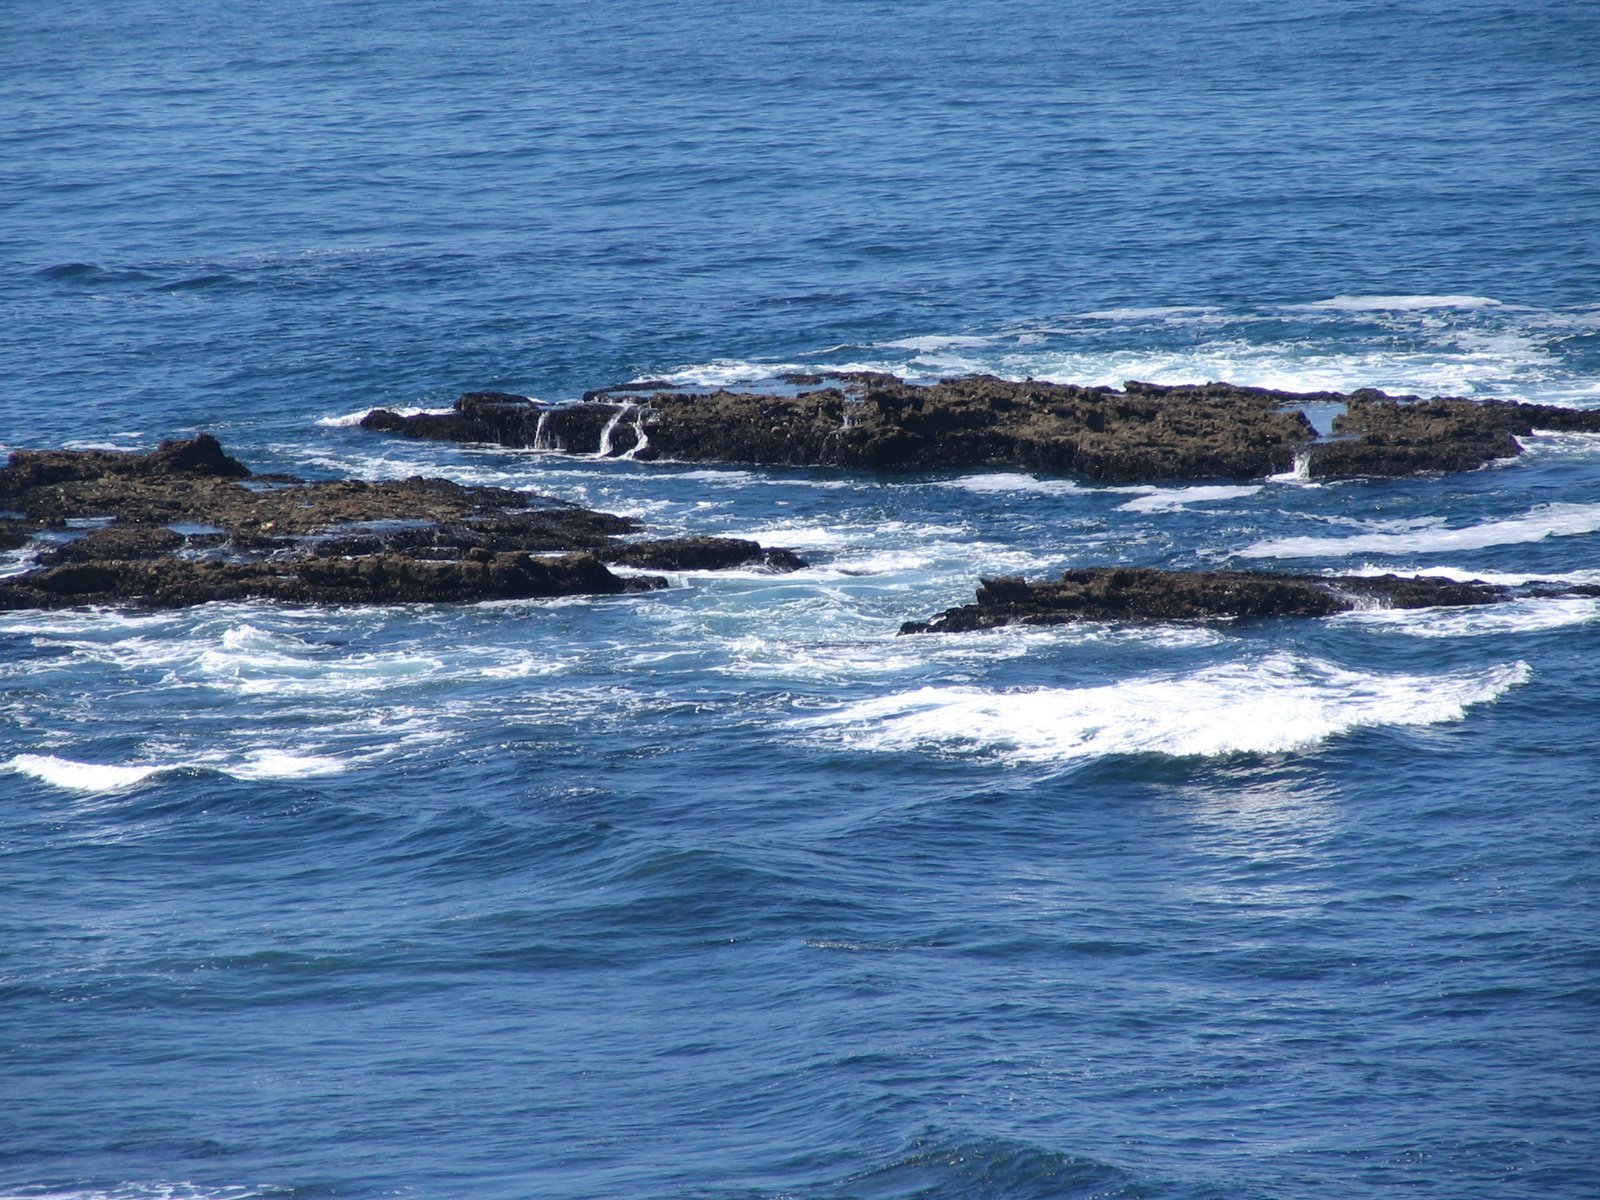 a bird perched on some rocks in the ocean